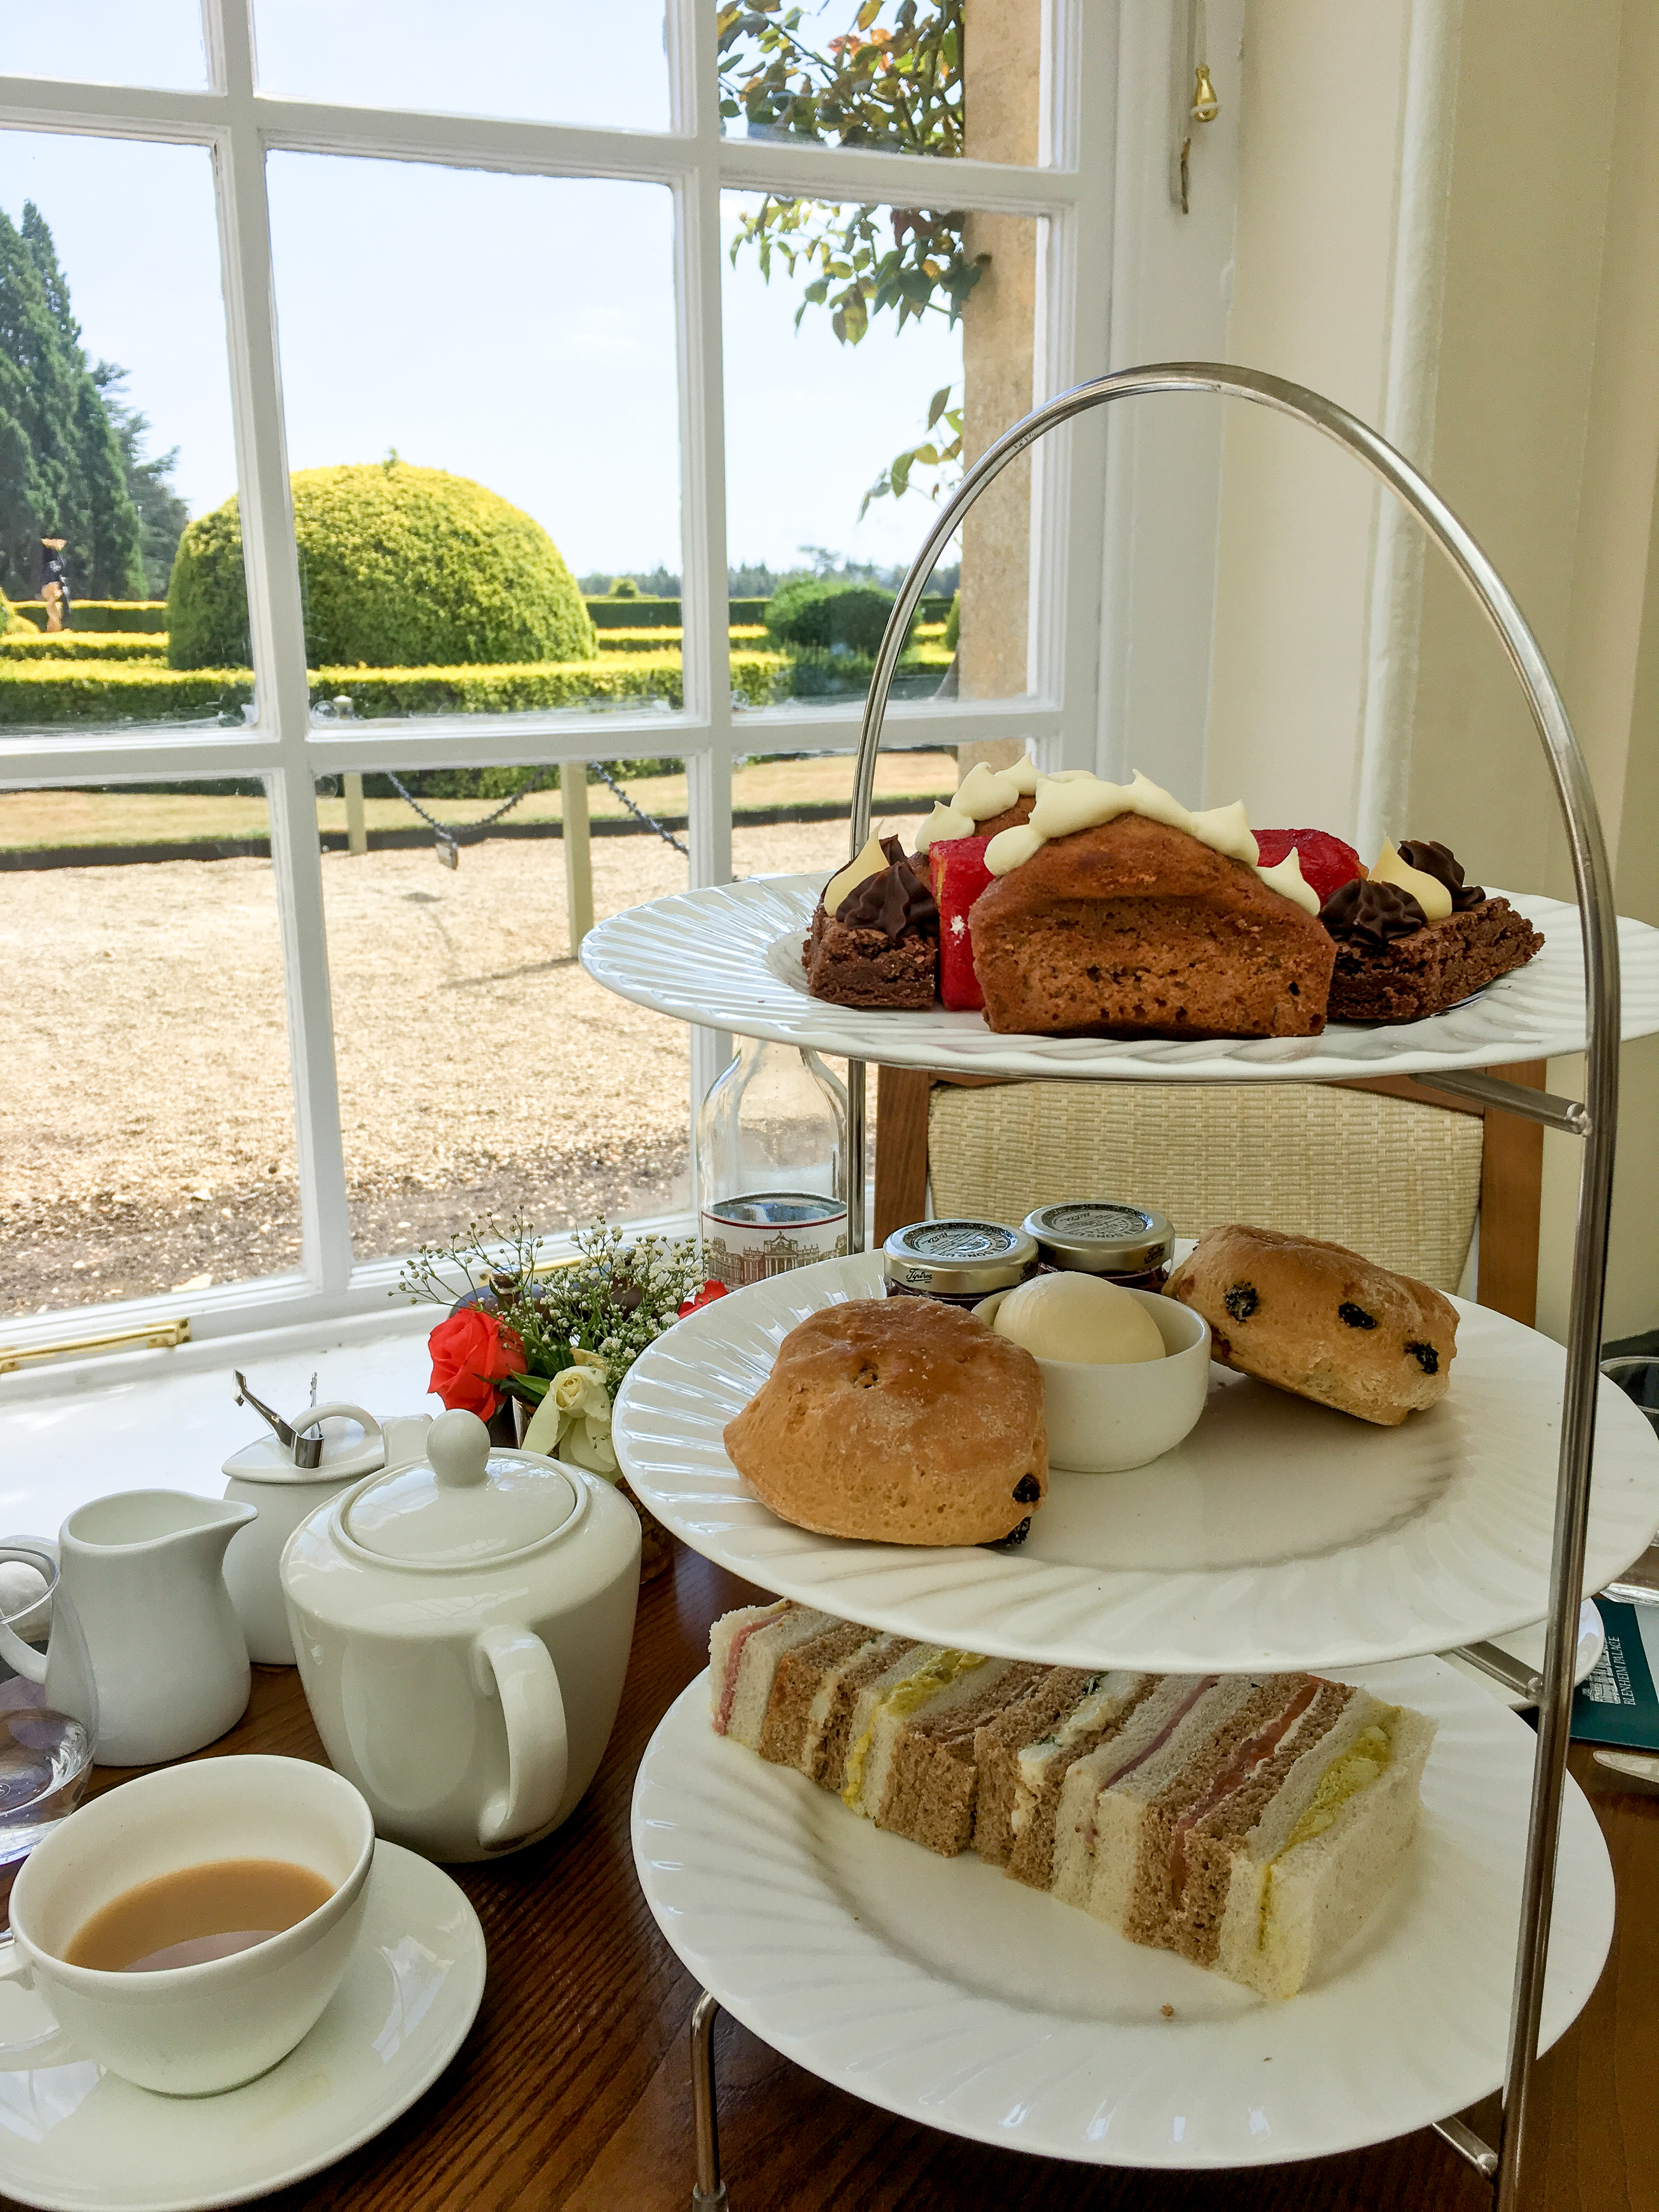 Afternoon Tea at The Orangery Blenheim Palace